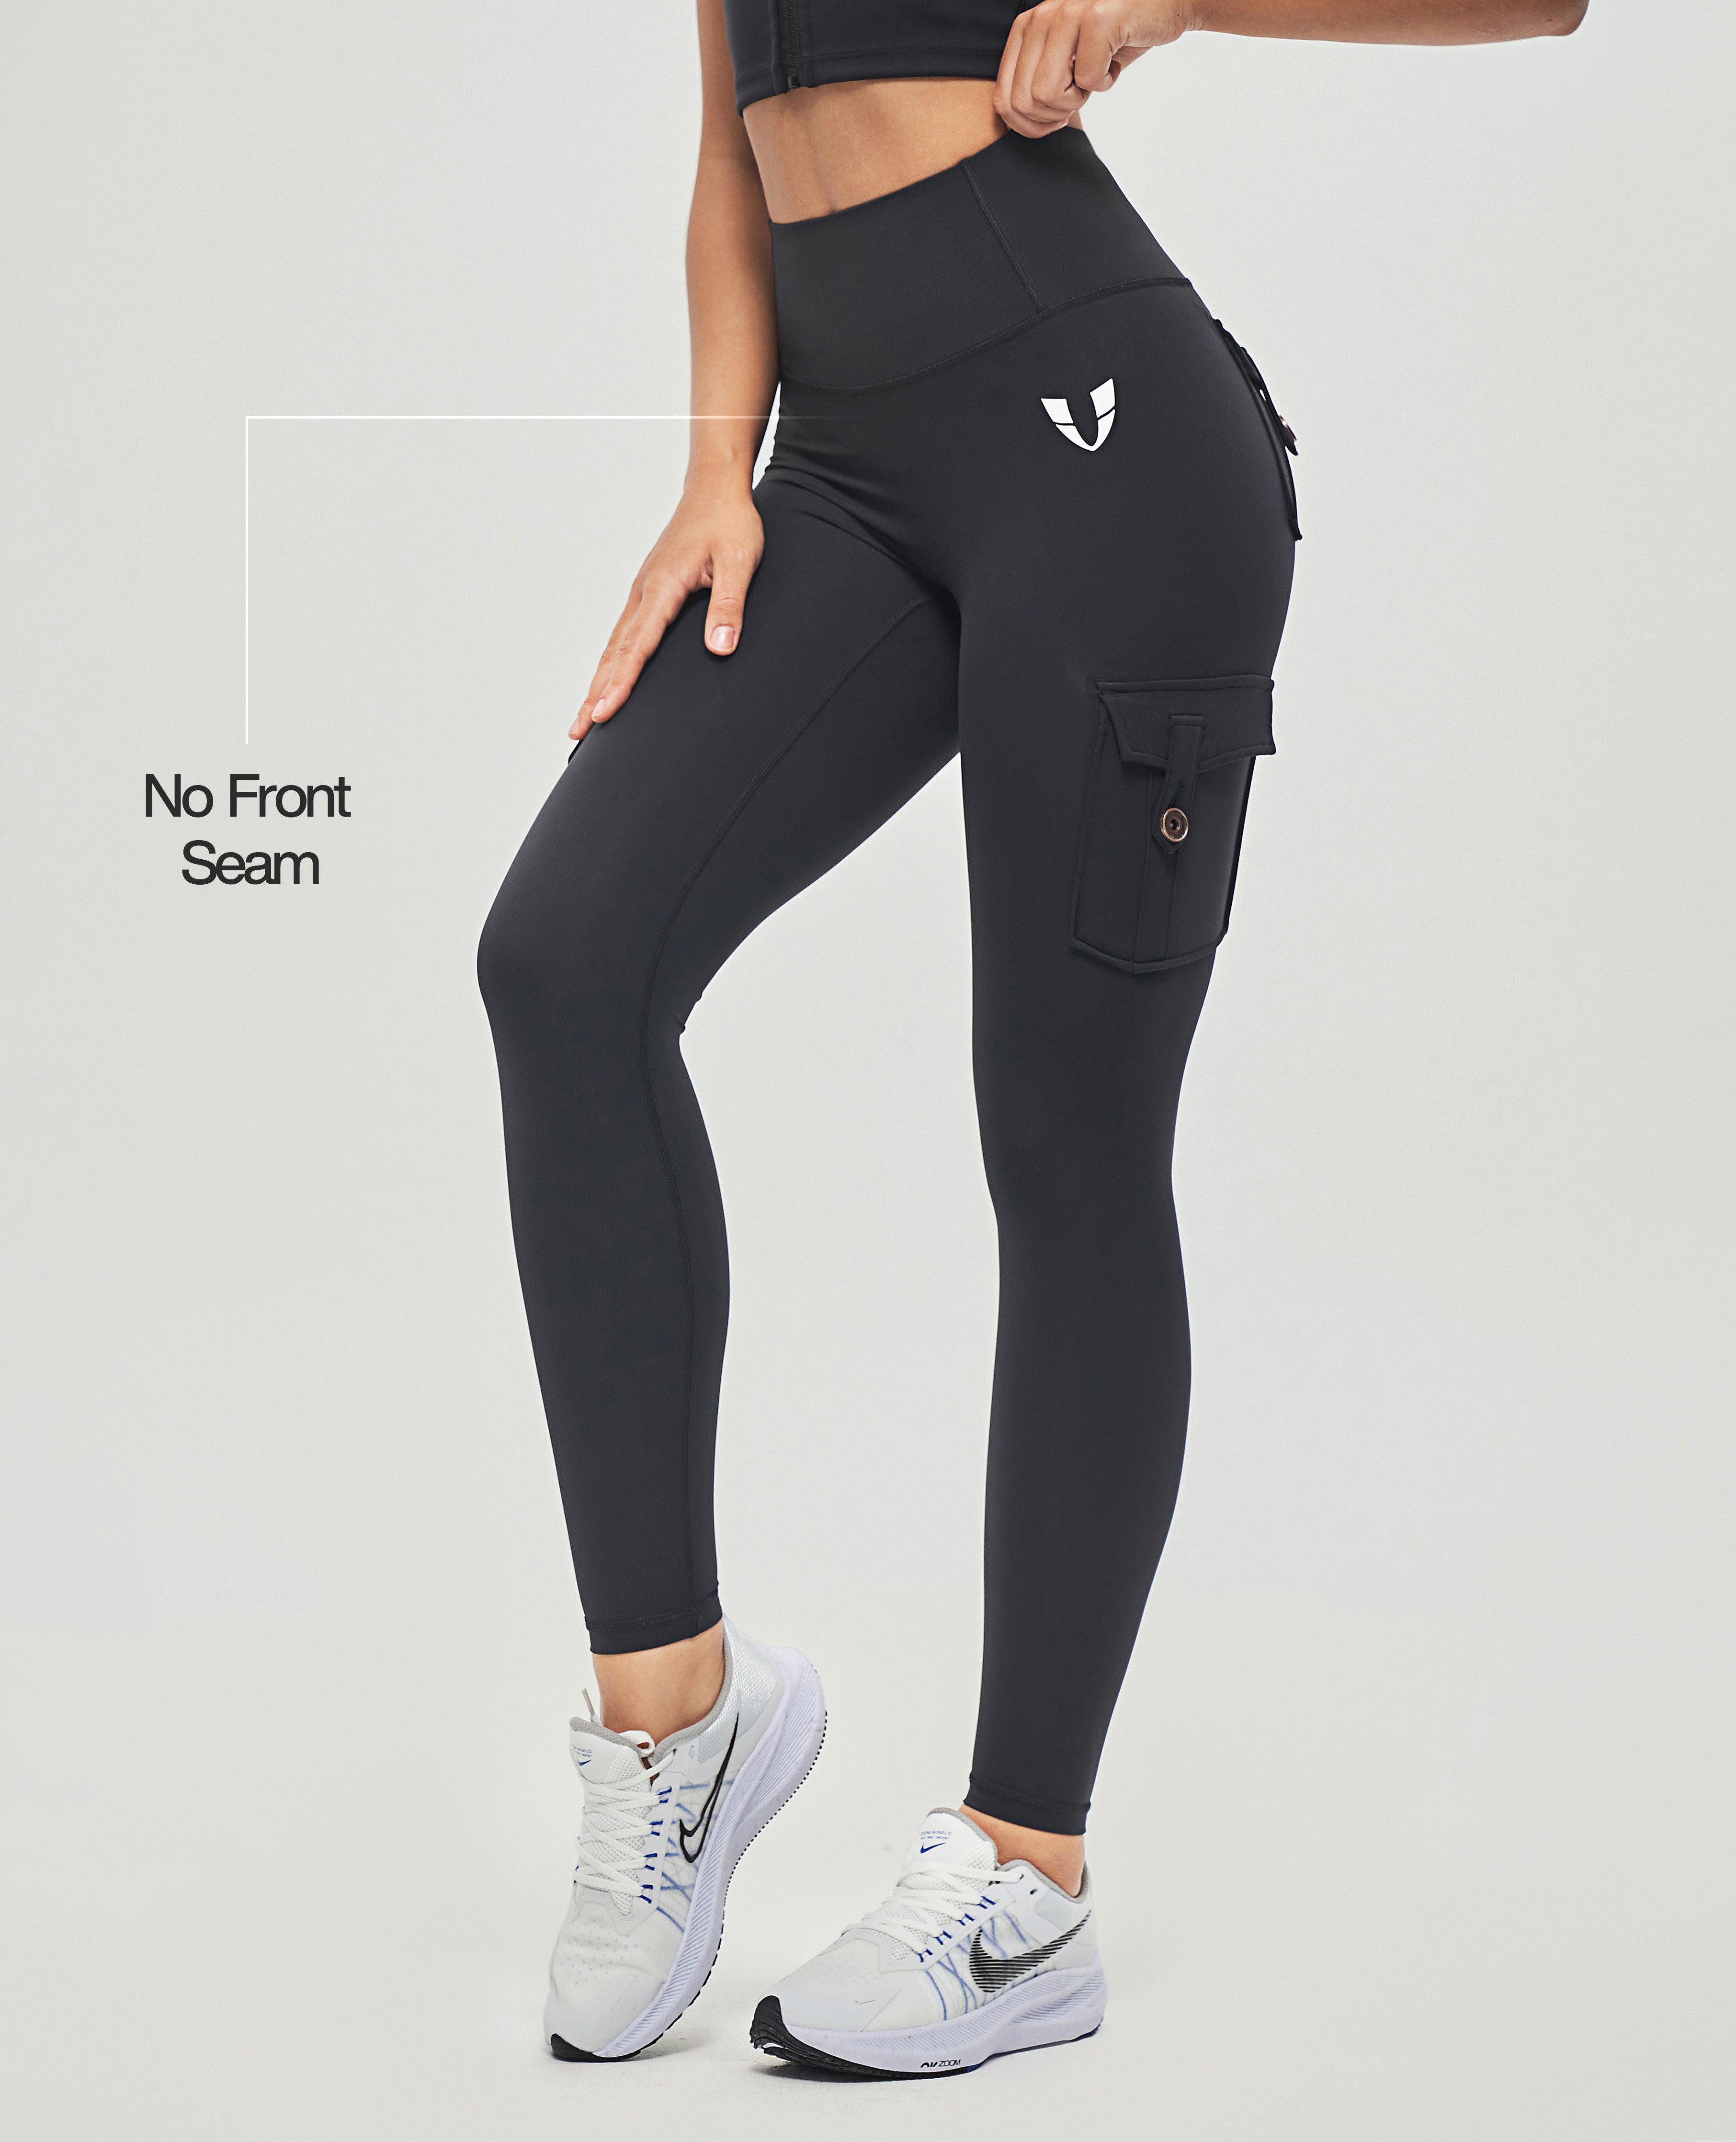 Say yes to our new Cargo Fitness Leggings in the stylish 𝐃𝐞𝐧𝐢𝐦  𝐂𝐨𝐥𝐨𝐫! 🖤💙 From high kicks to squats, these leggings have you  covered! 🎁To…